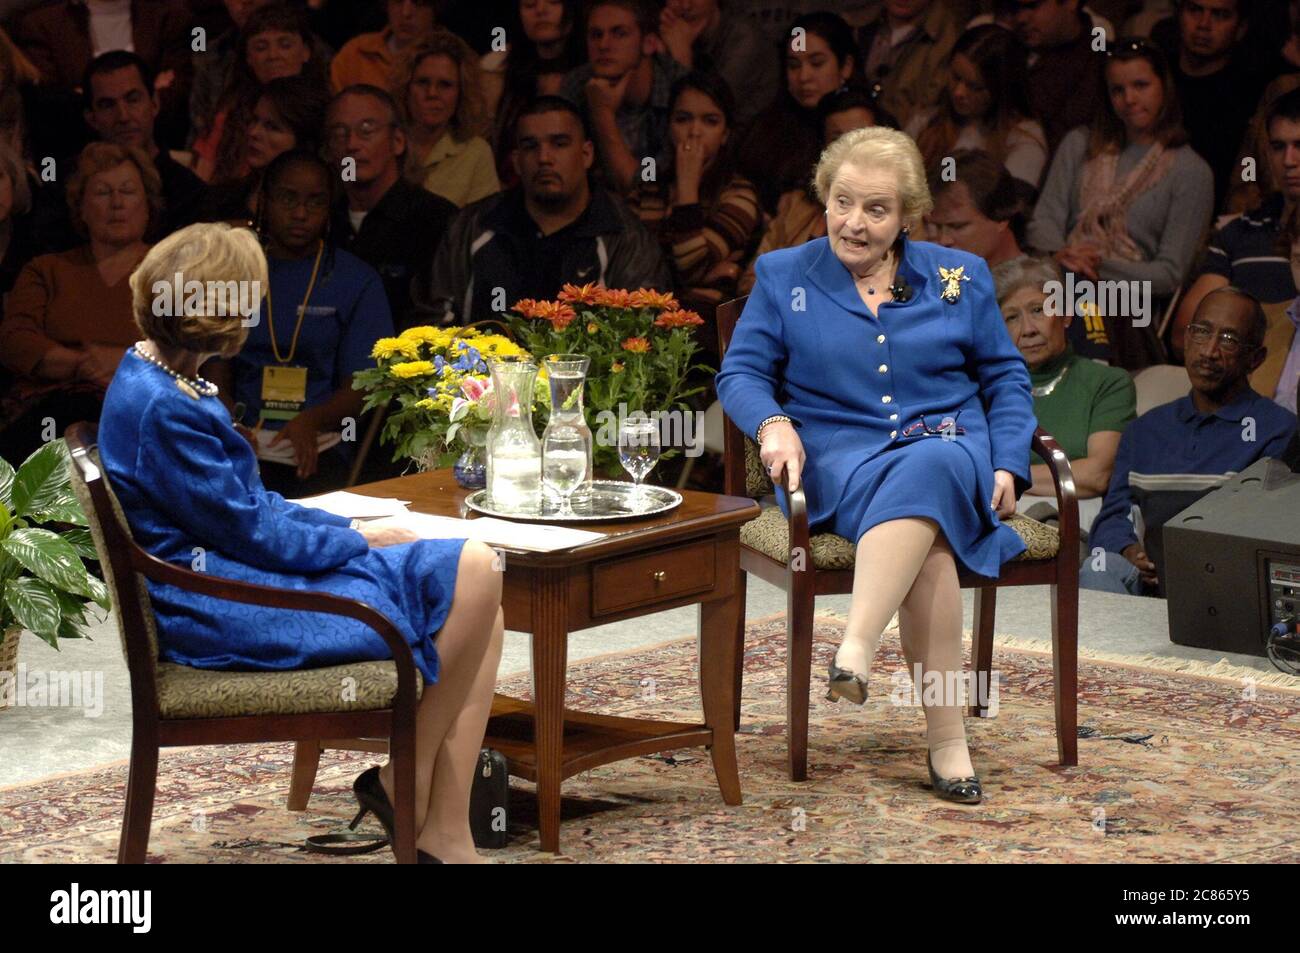 Austin, Texas USA, November 17, 2005: Former U.S. Secretary of State Madeline Albright (right) discusses what she says is the failed foreign policy of the Bush administration during a dialogue with Rosario Green, former secretary of state of Mexico, at St. Edward's University. Albright served eight years under President Clinton. ©Bob Daemmrich Stock Photo